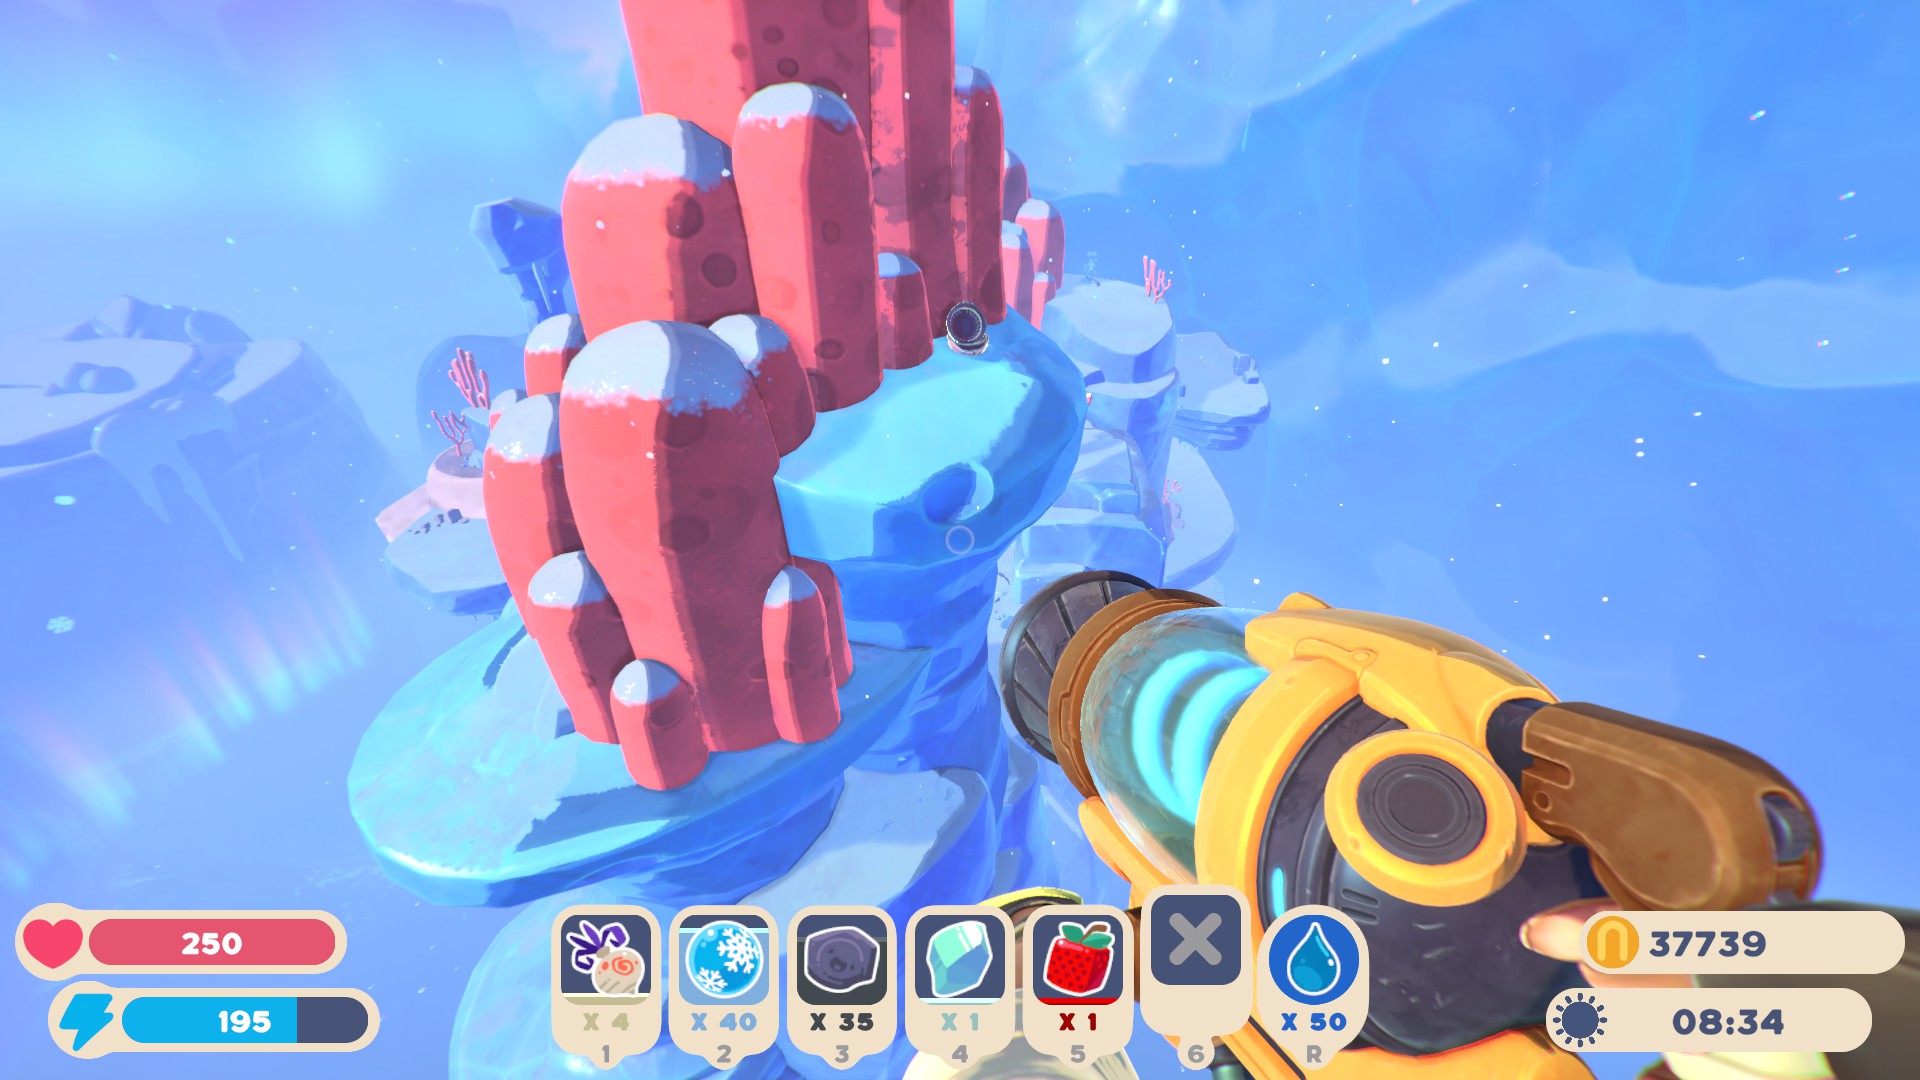 Slime Rancher 2 - Capsule Locations for Powderfall Bluffs - Pods 13 - 20 (Exterior II) - 084FDB9